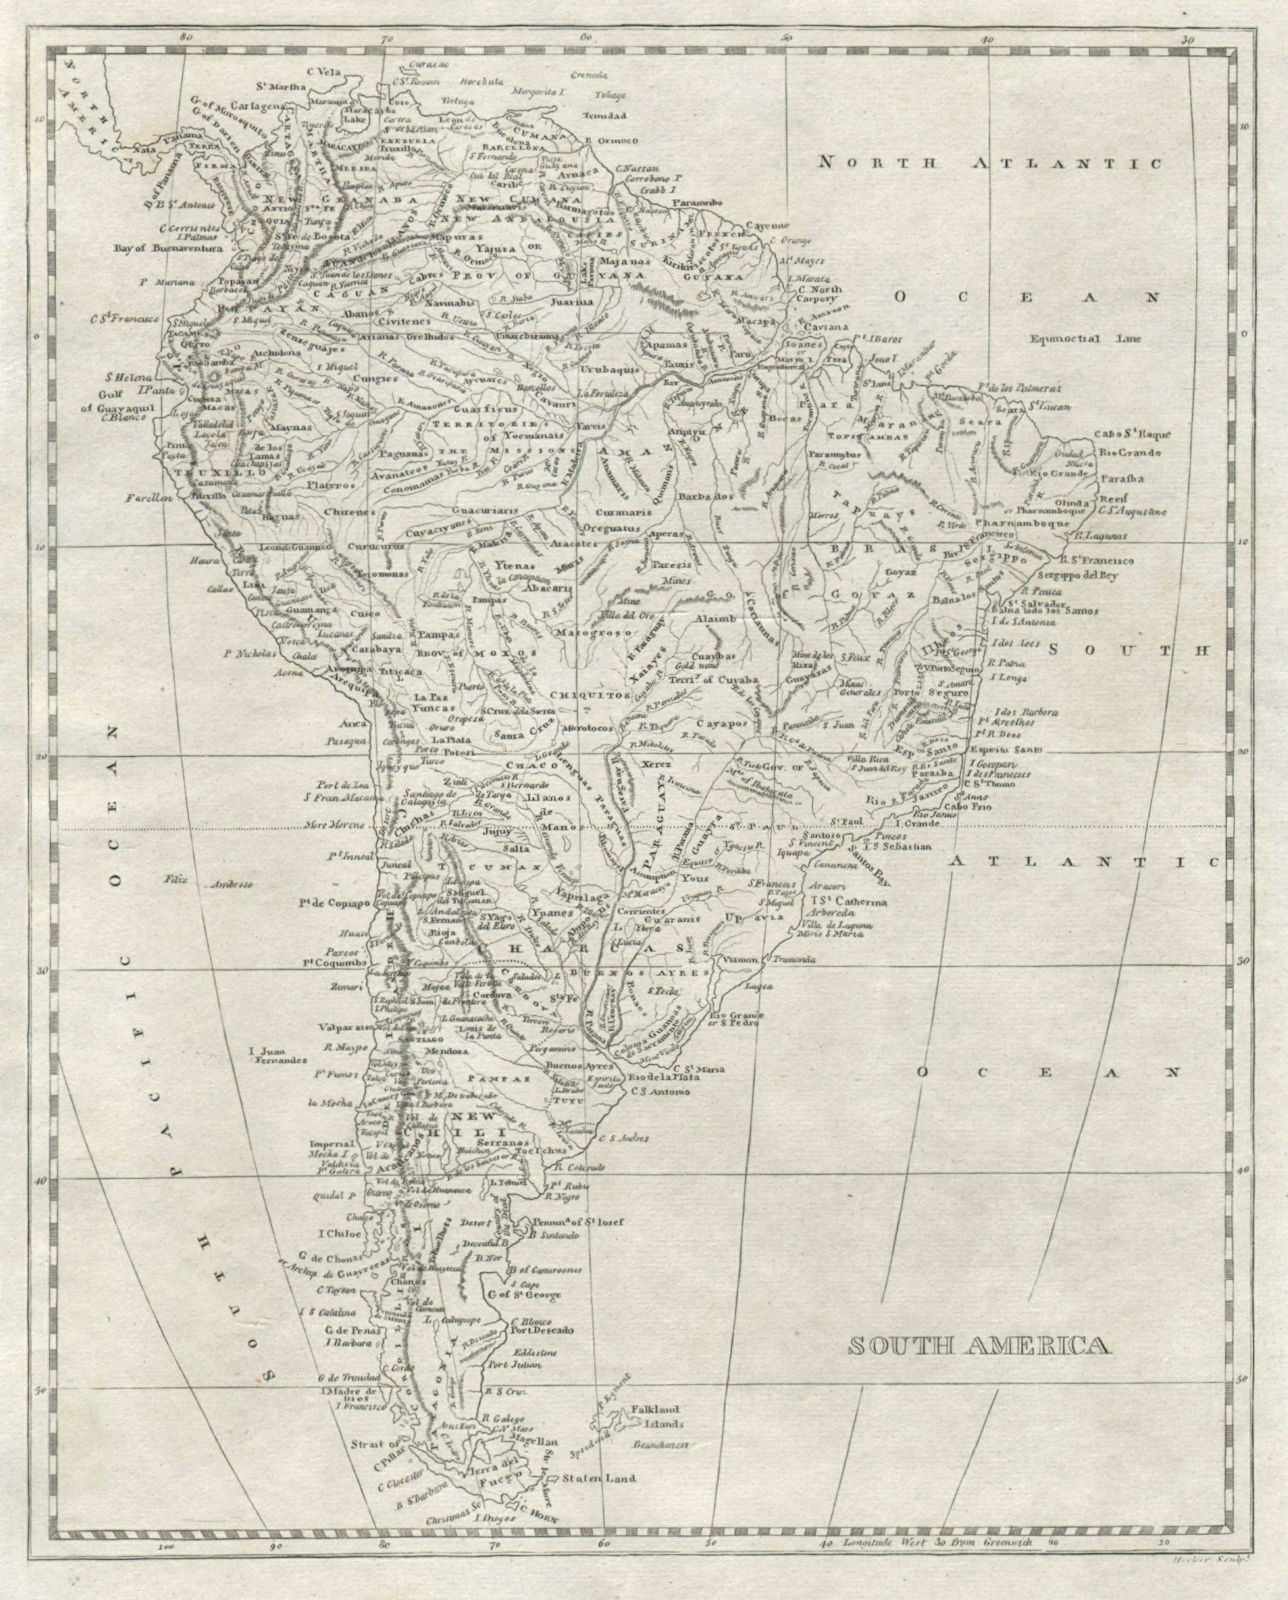 Associate Product South America by Arrowsmith & Lewis 1812 old antique vintage map plan chart